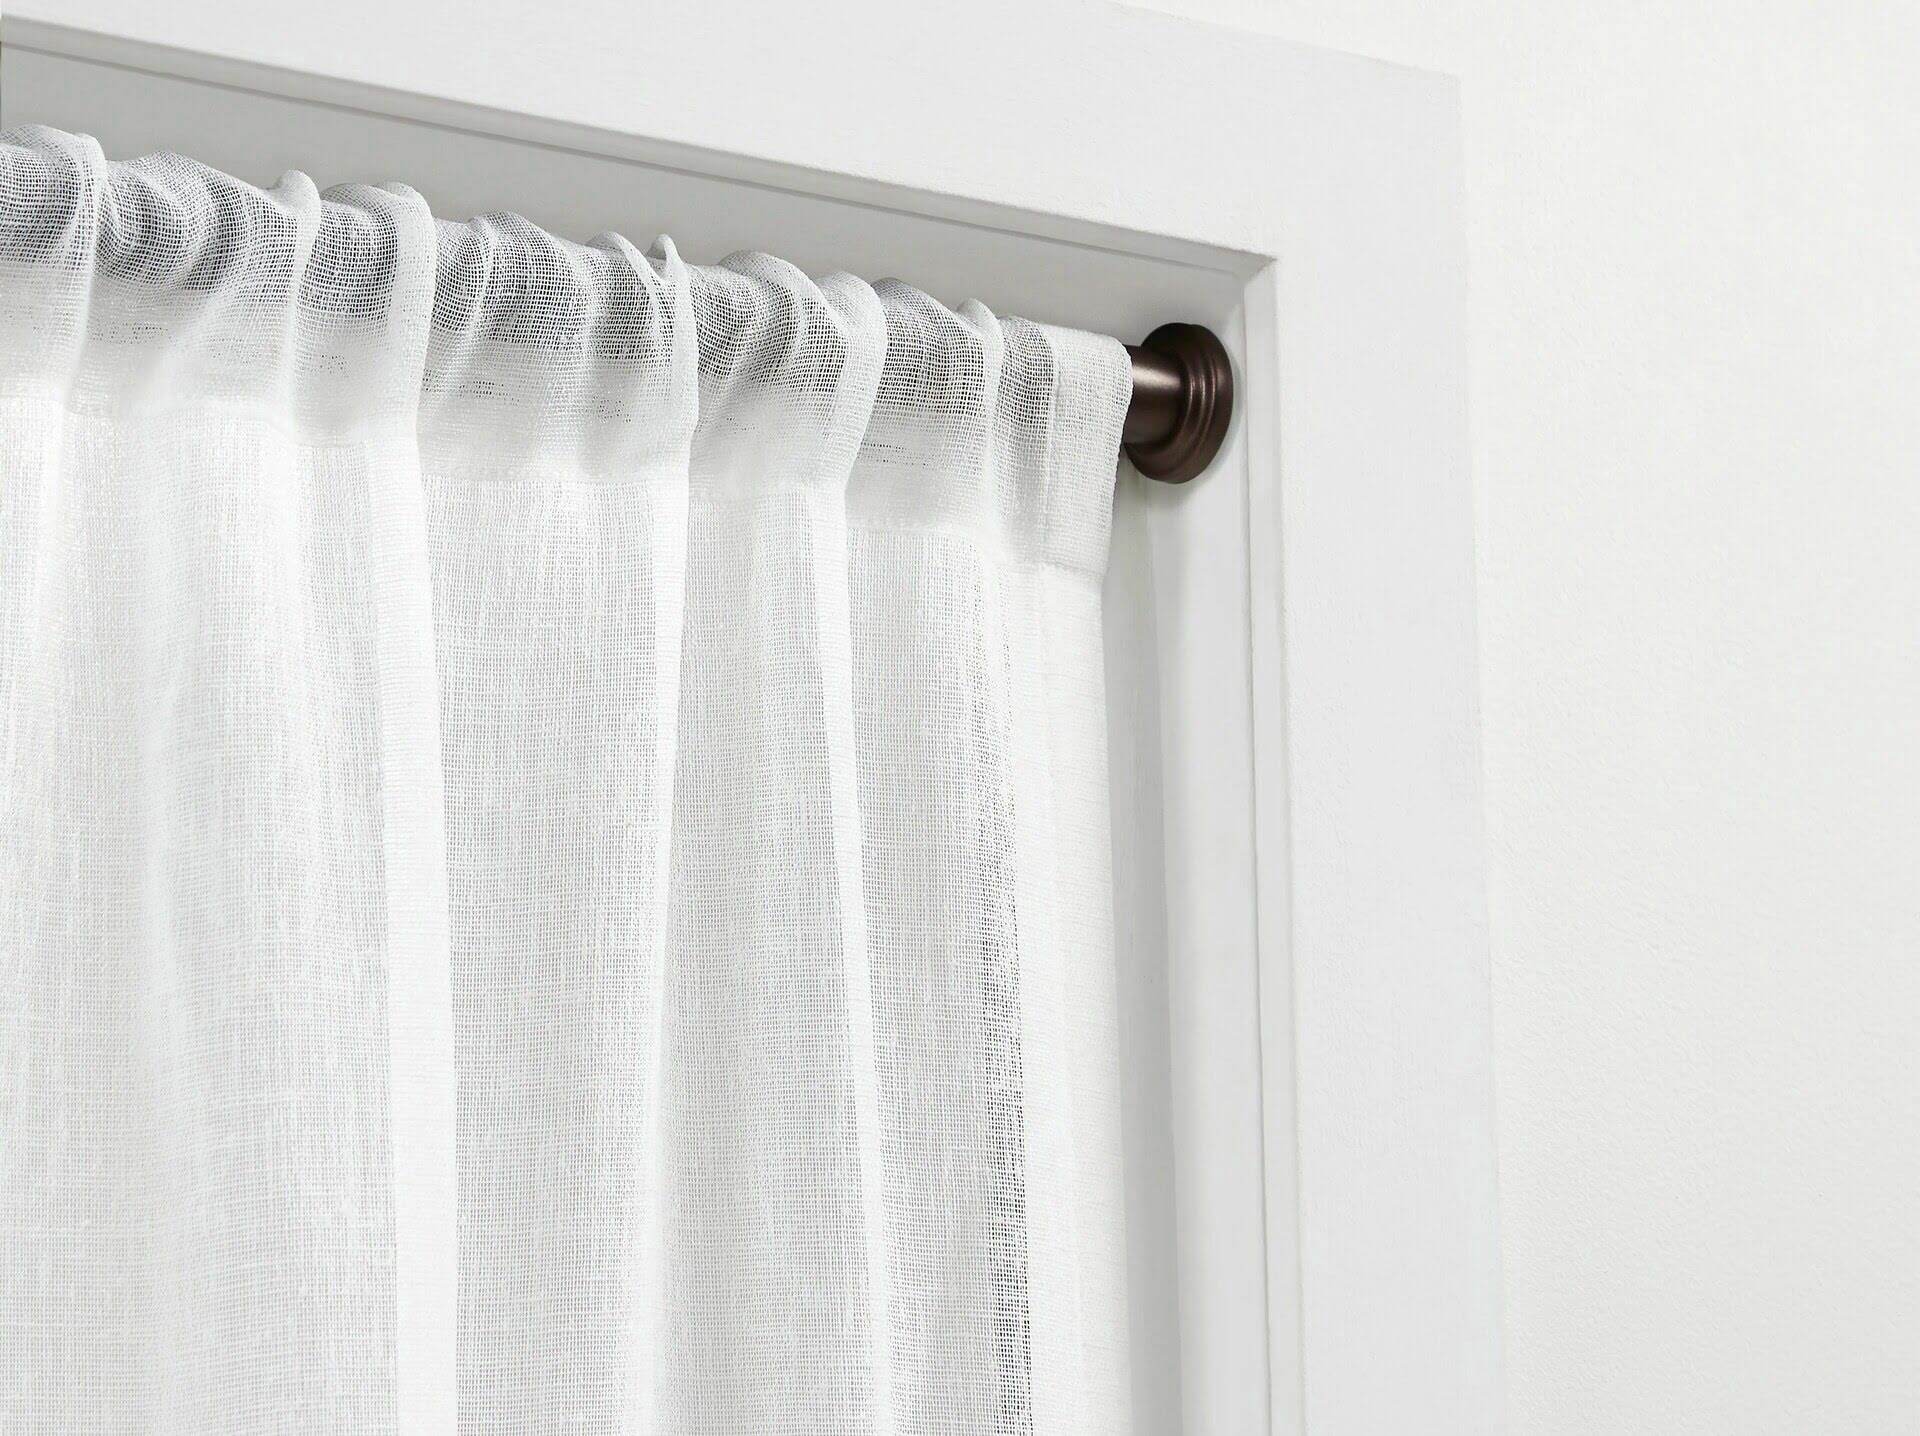 How to Hang Curtains Without Putting Holes in the Wall 